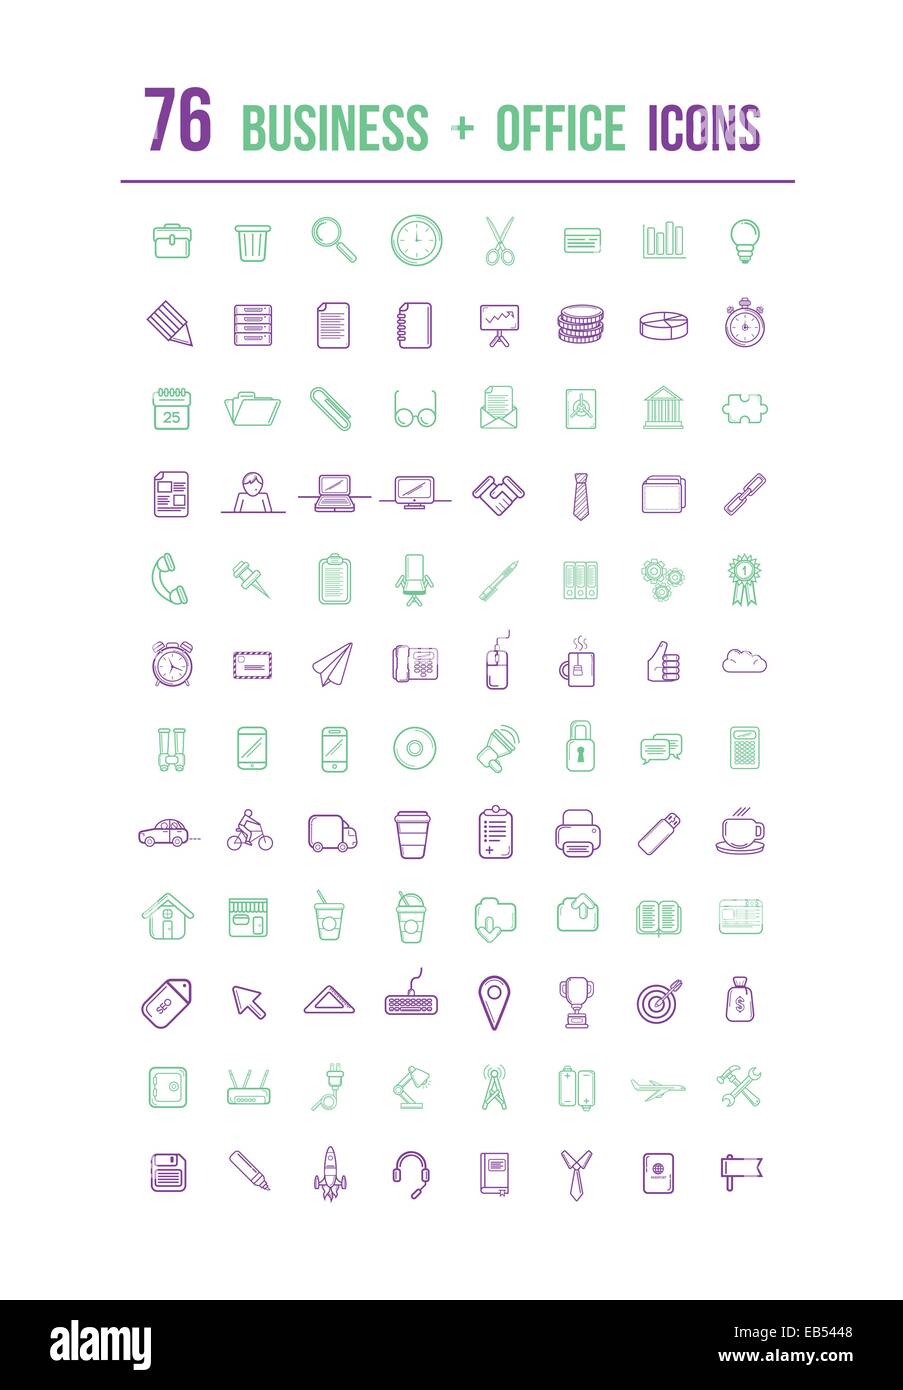 Business and office icons in purple and green Stock Vector